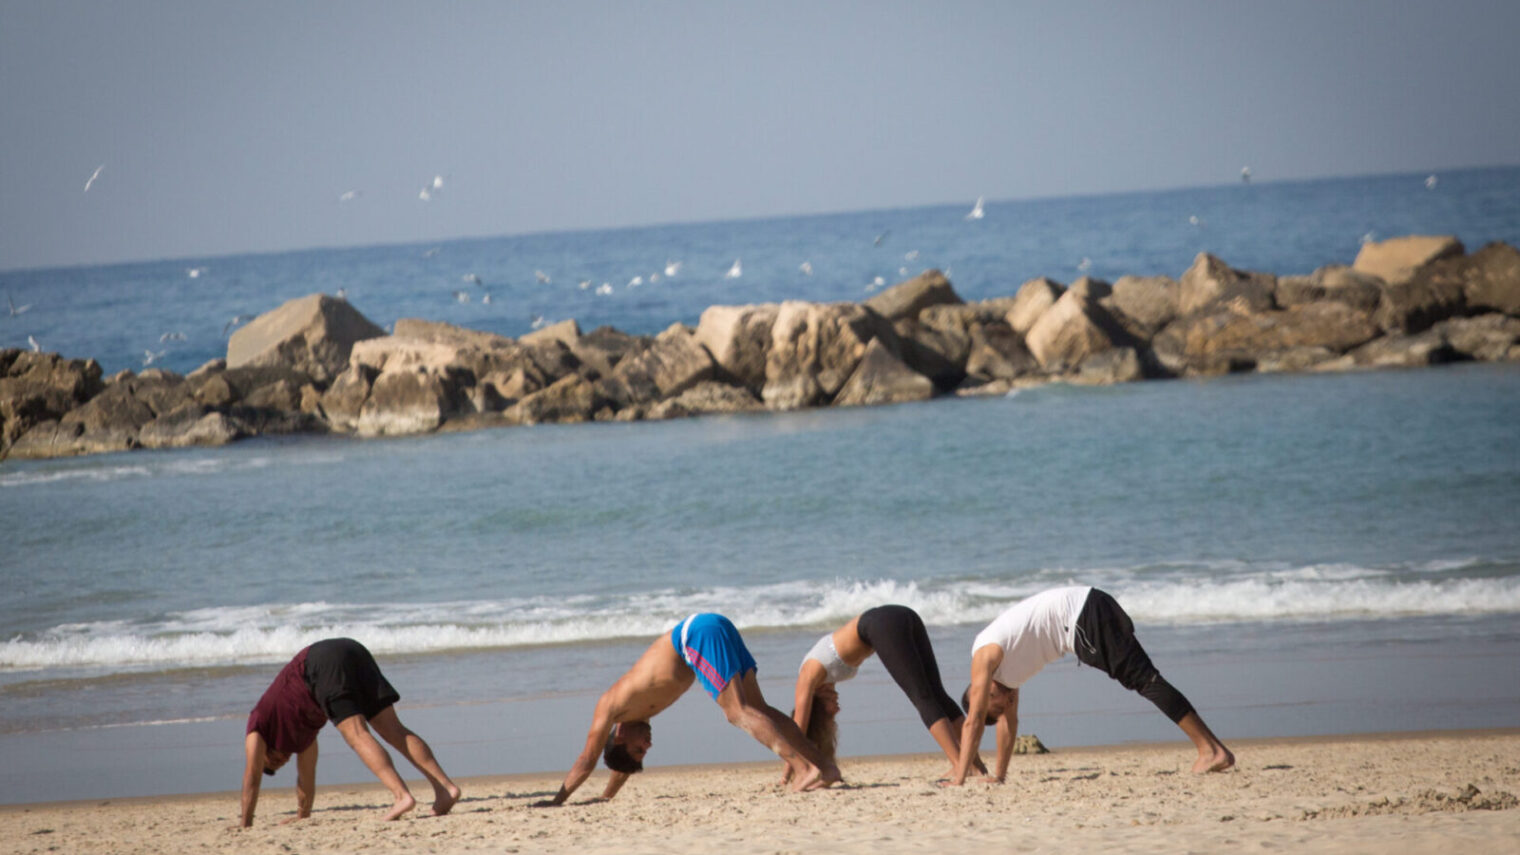 Israelis take their exercise to the beach in Tel Aviv during lockdown,December 30, 2020. Photo by Miriam Alster/Flash90